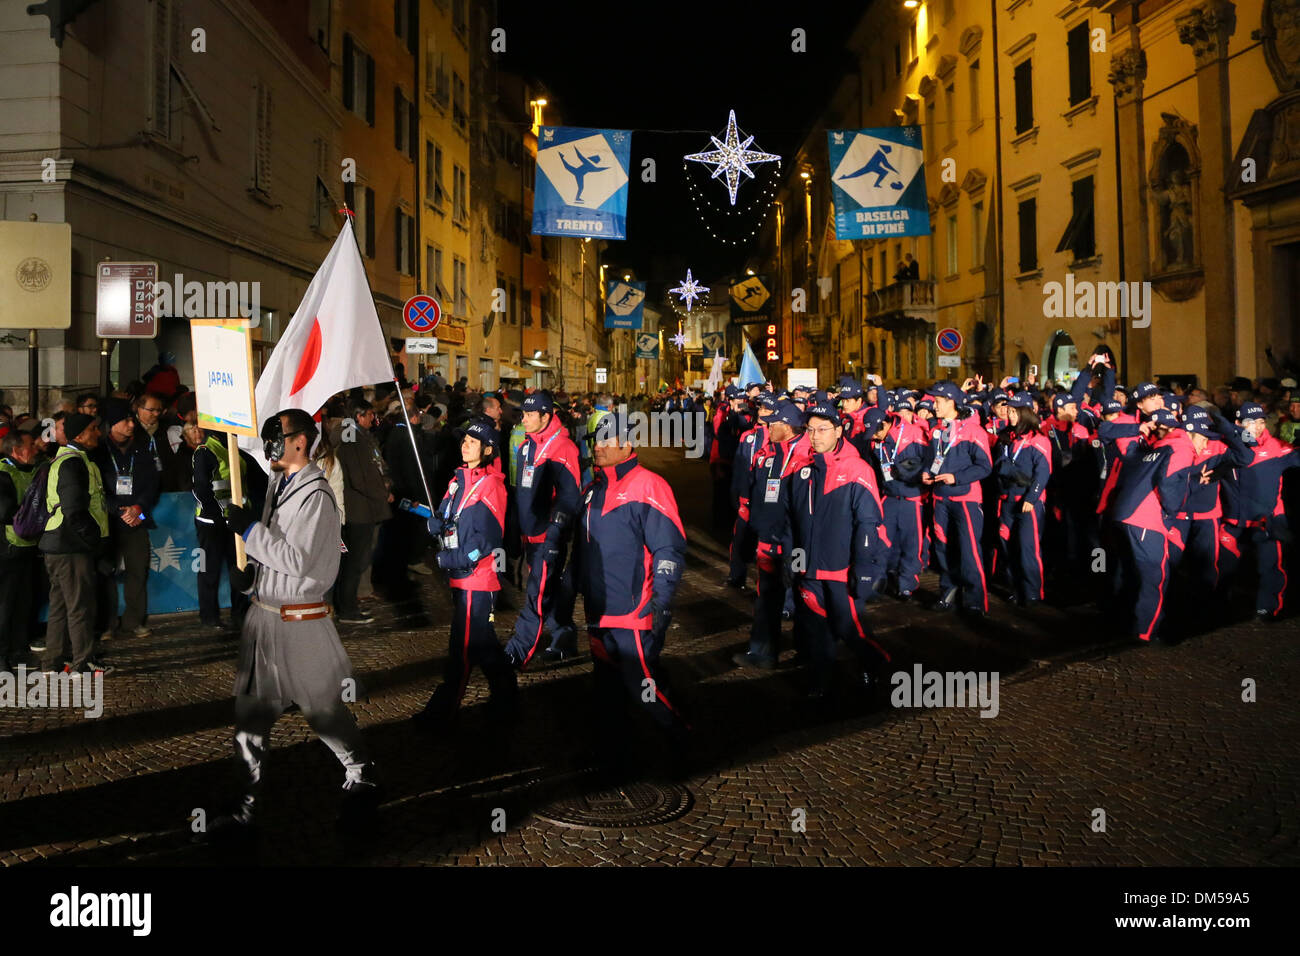 Japan Delegation (JPN), DECEMBER 11, 2013 : the 26th Winter Universiade Trentino 2013 Opening ceremony at Trento Main Square in Trentino , Italy. Credit:  AFLO SPORT/Alamy Live News Stock Photo